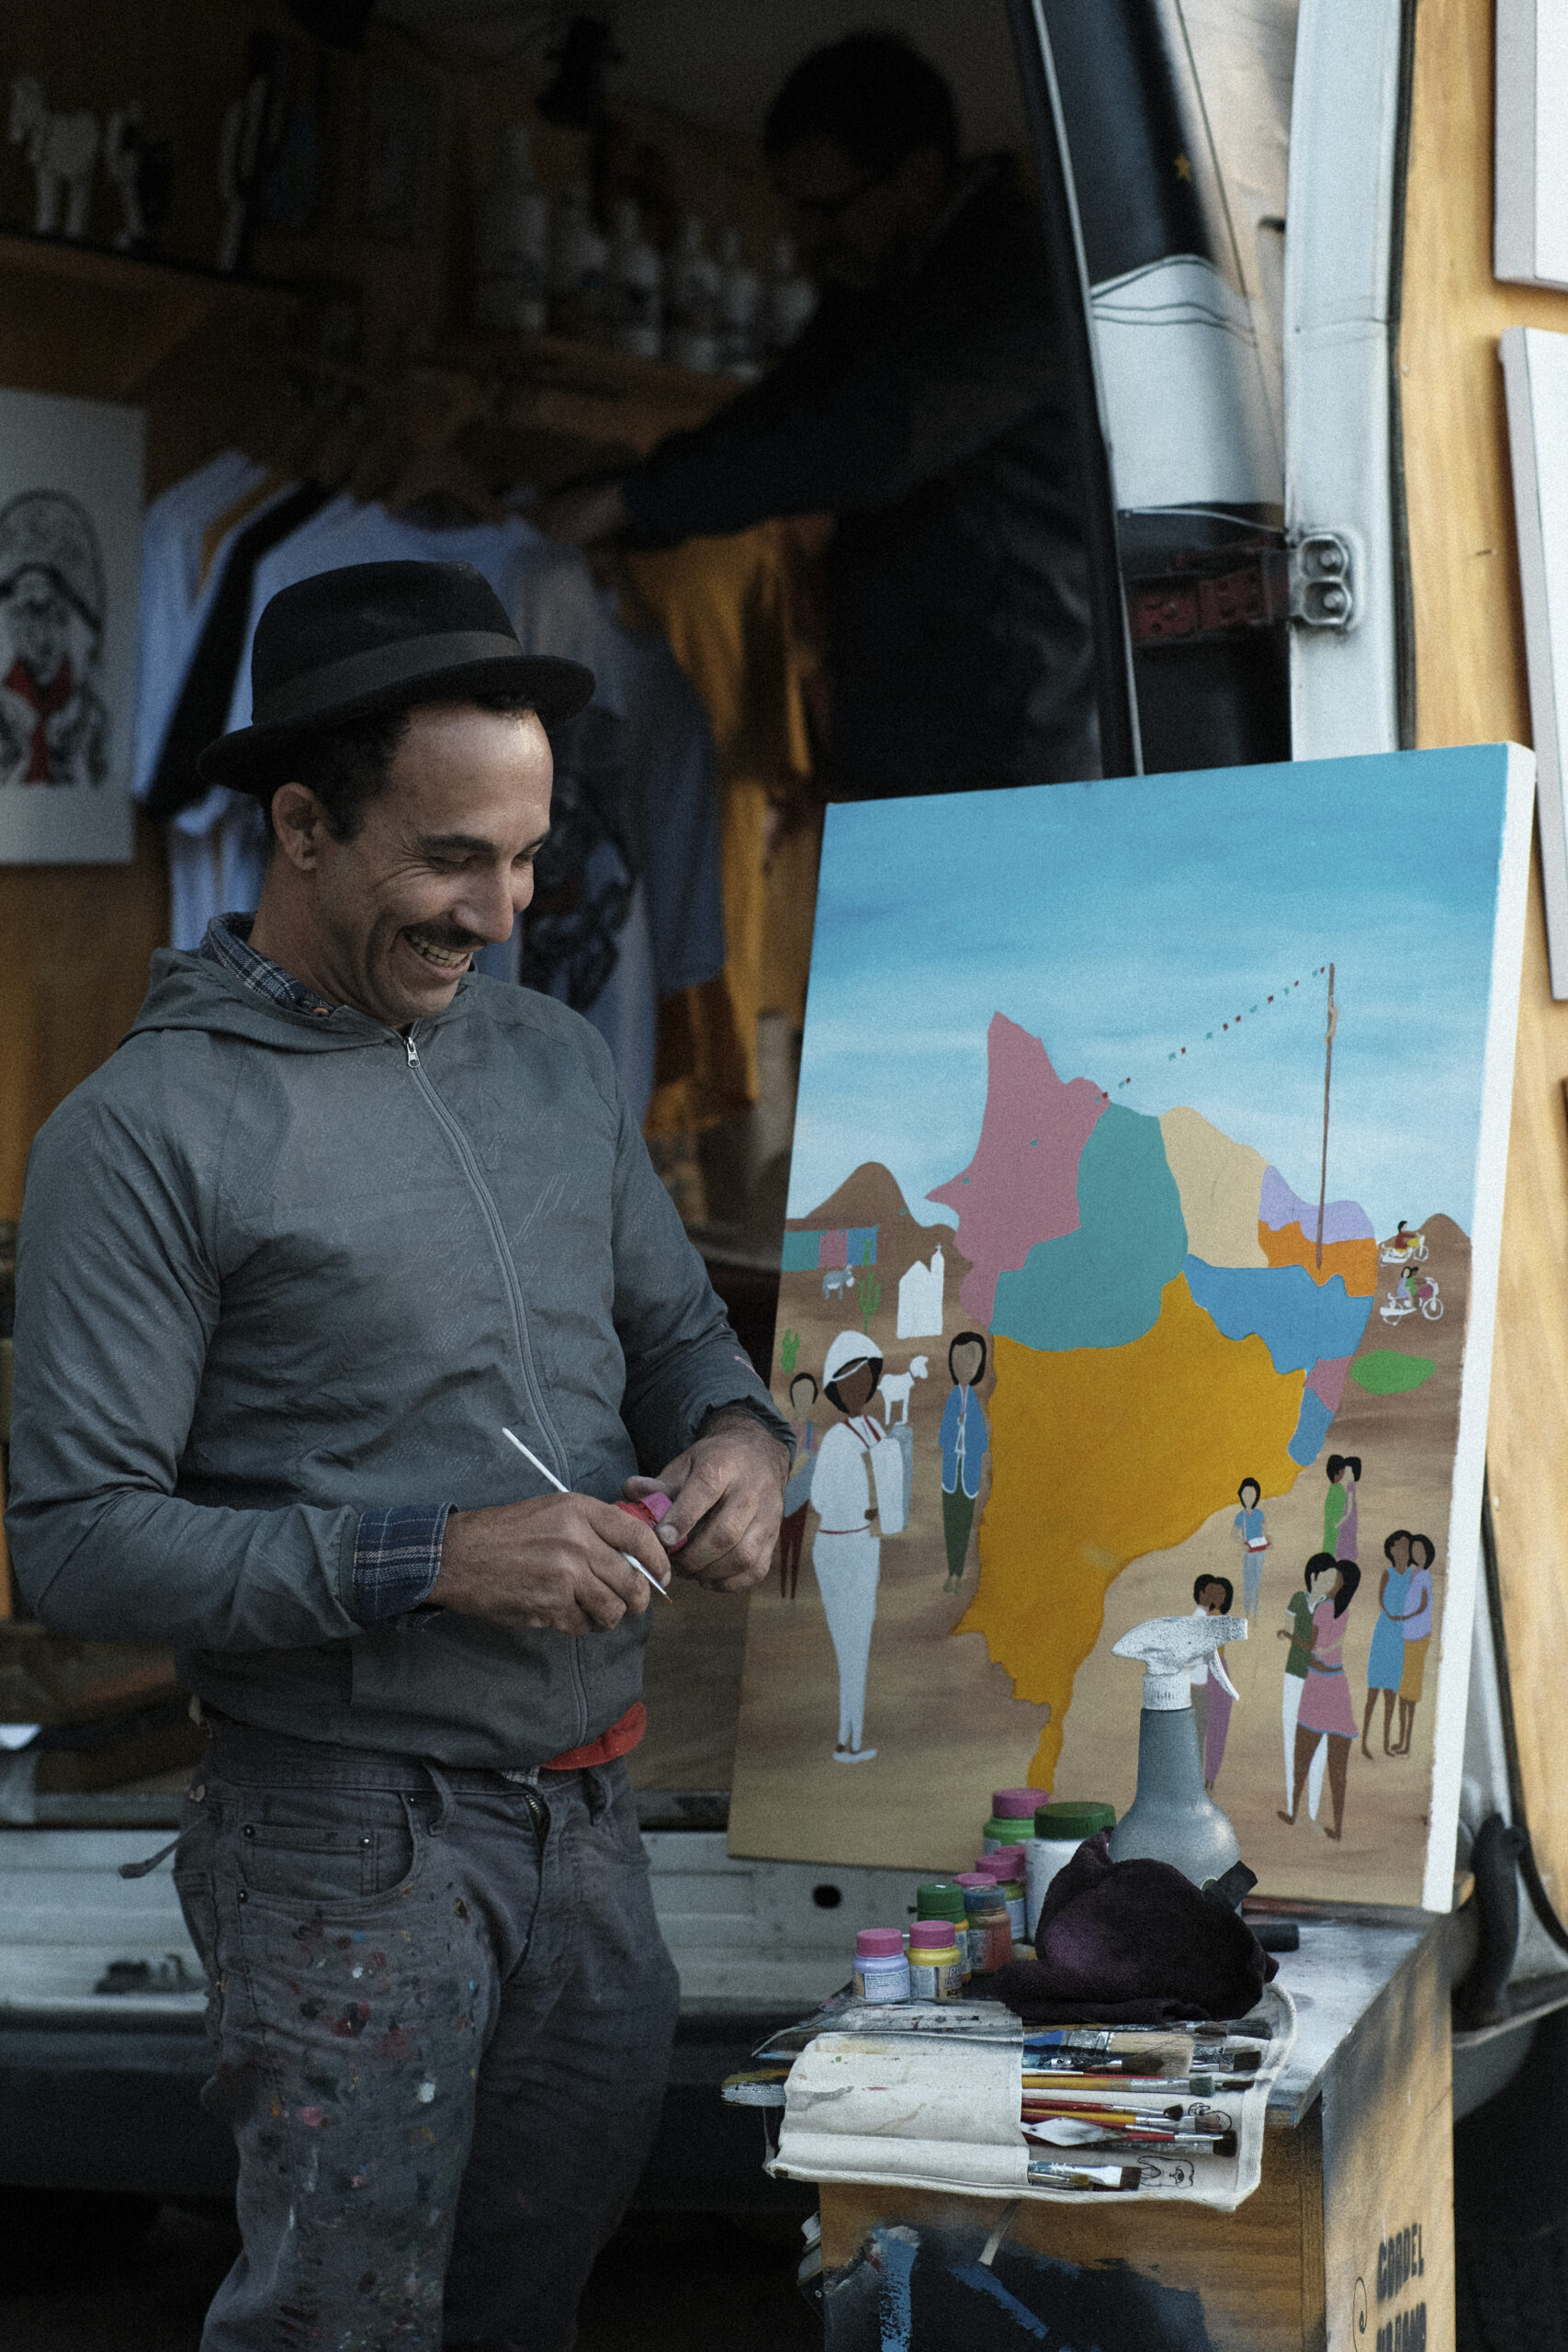 An artist in the street smiling while holding an art tool by his painting